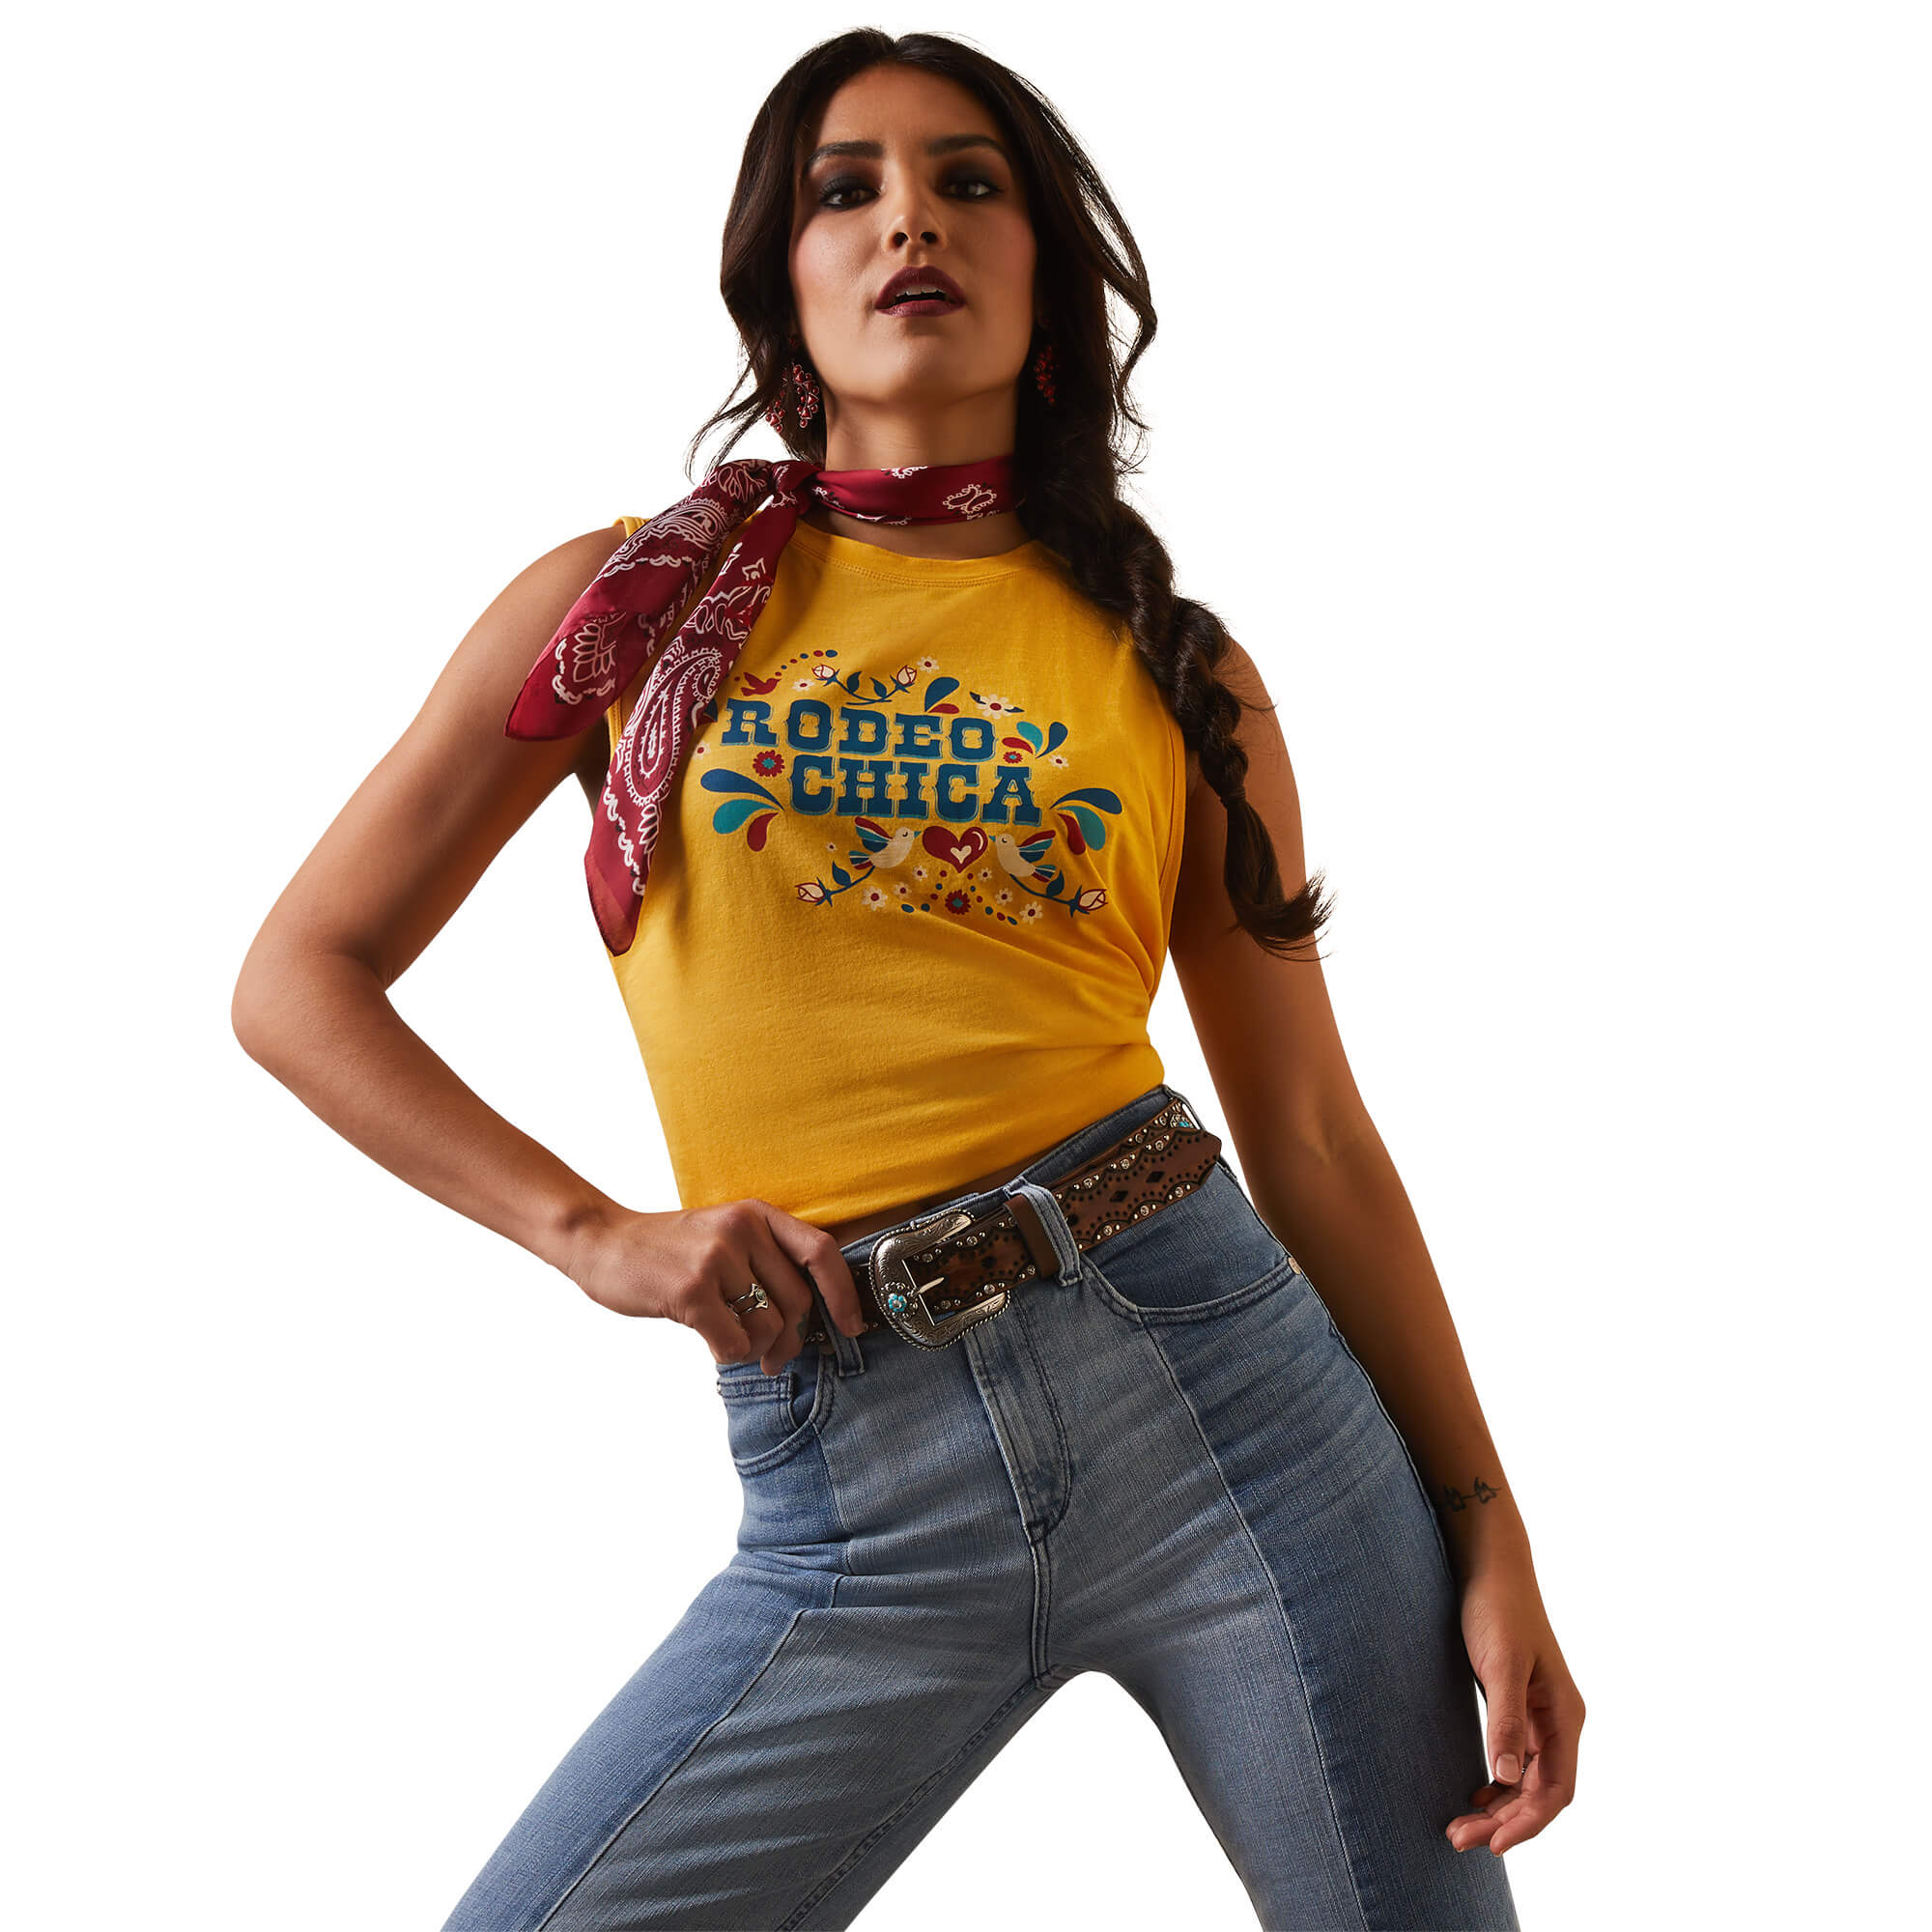 Women's Rodeo Chica Tank in Yolk Yellow Cotton, Size: Medium by Ariat